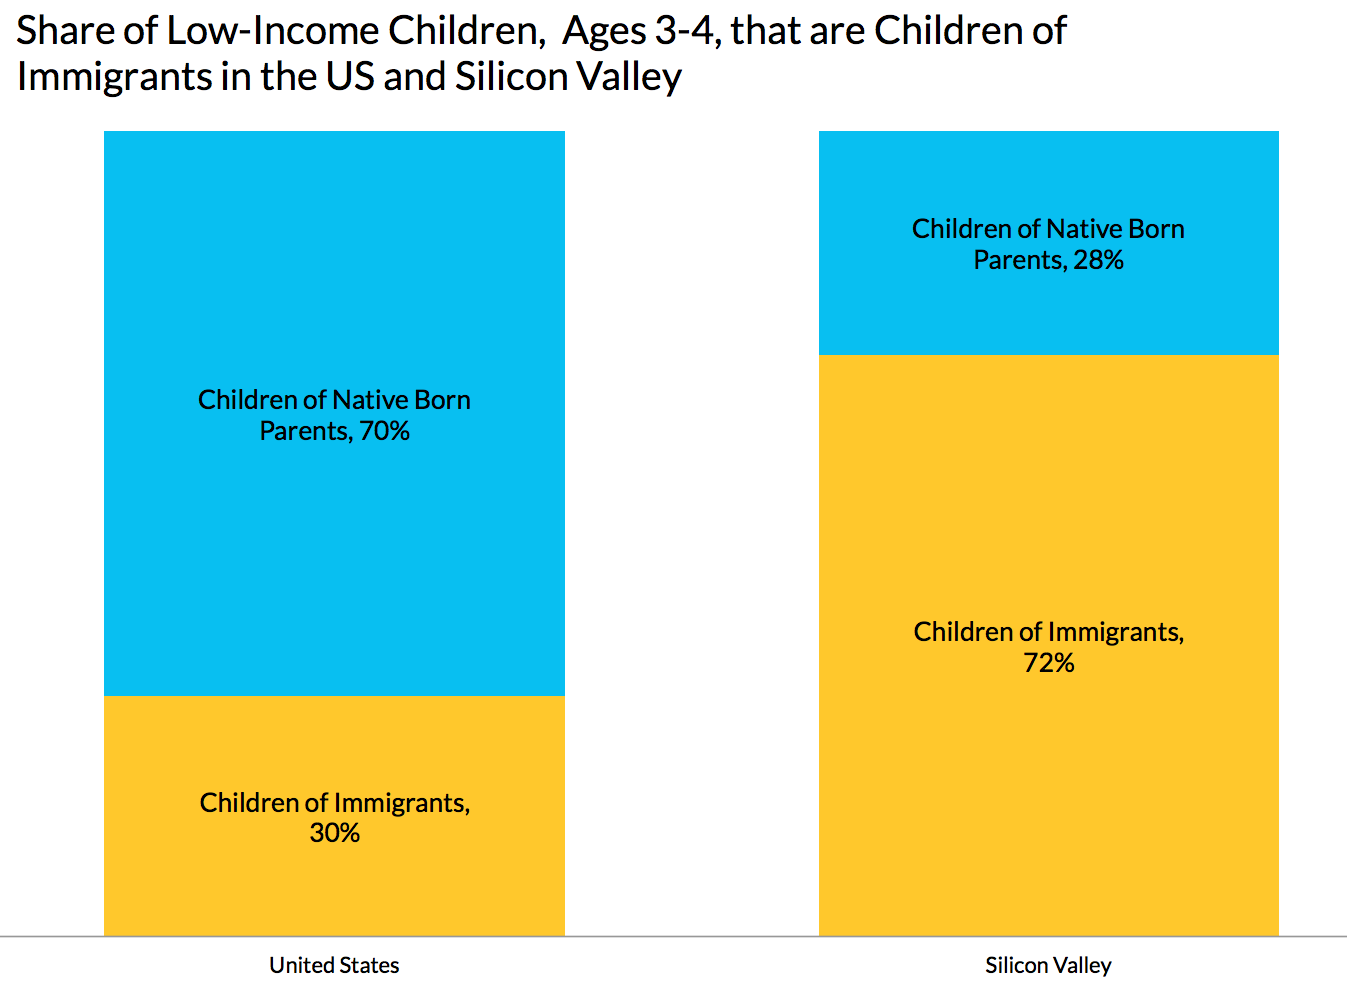 Share of Low-Income Children, Ages 3-4, that are Children of Immigrants in the U.S. and Silicon Valley